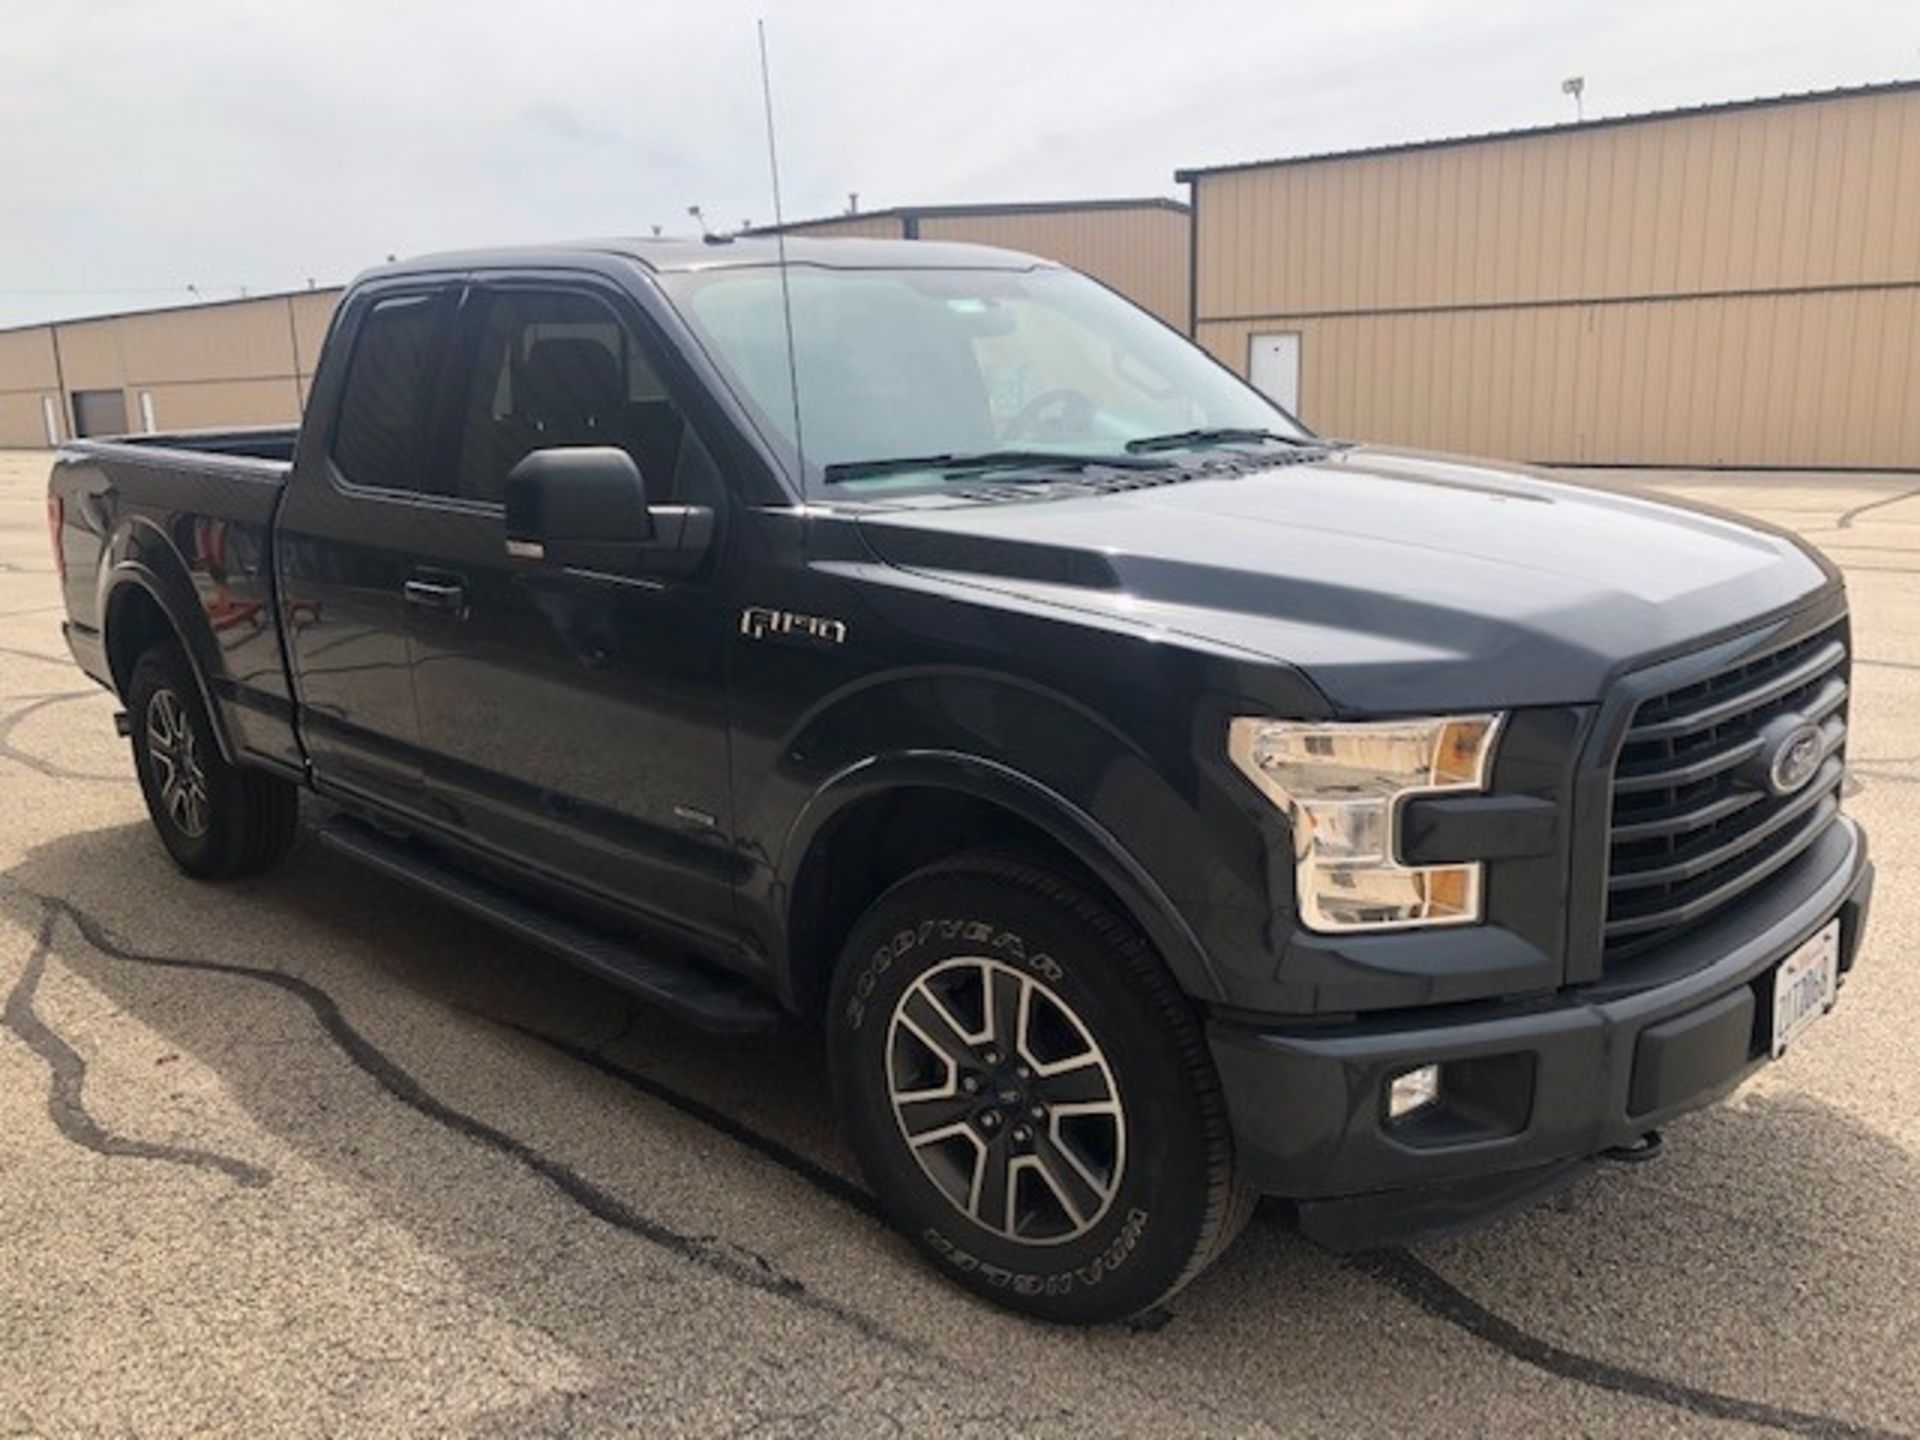 2016 Ford F-150 4X4 Supercab Pick Up Truck, VIN 1FTEX1EP5GFA36576, ( 43,000 Indicated Miles) Located - Image 4 of 6